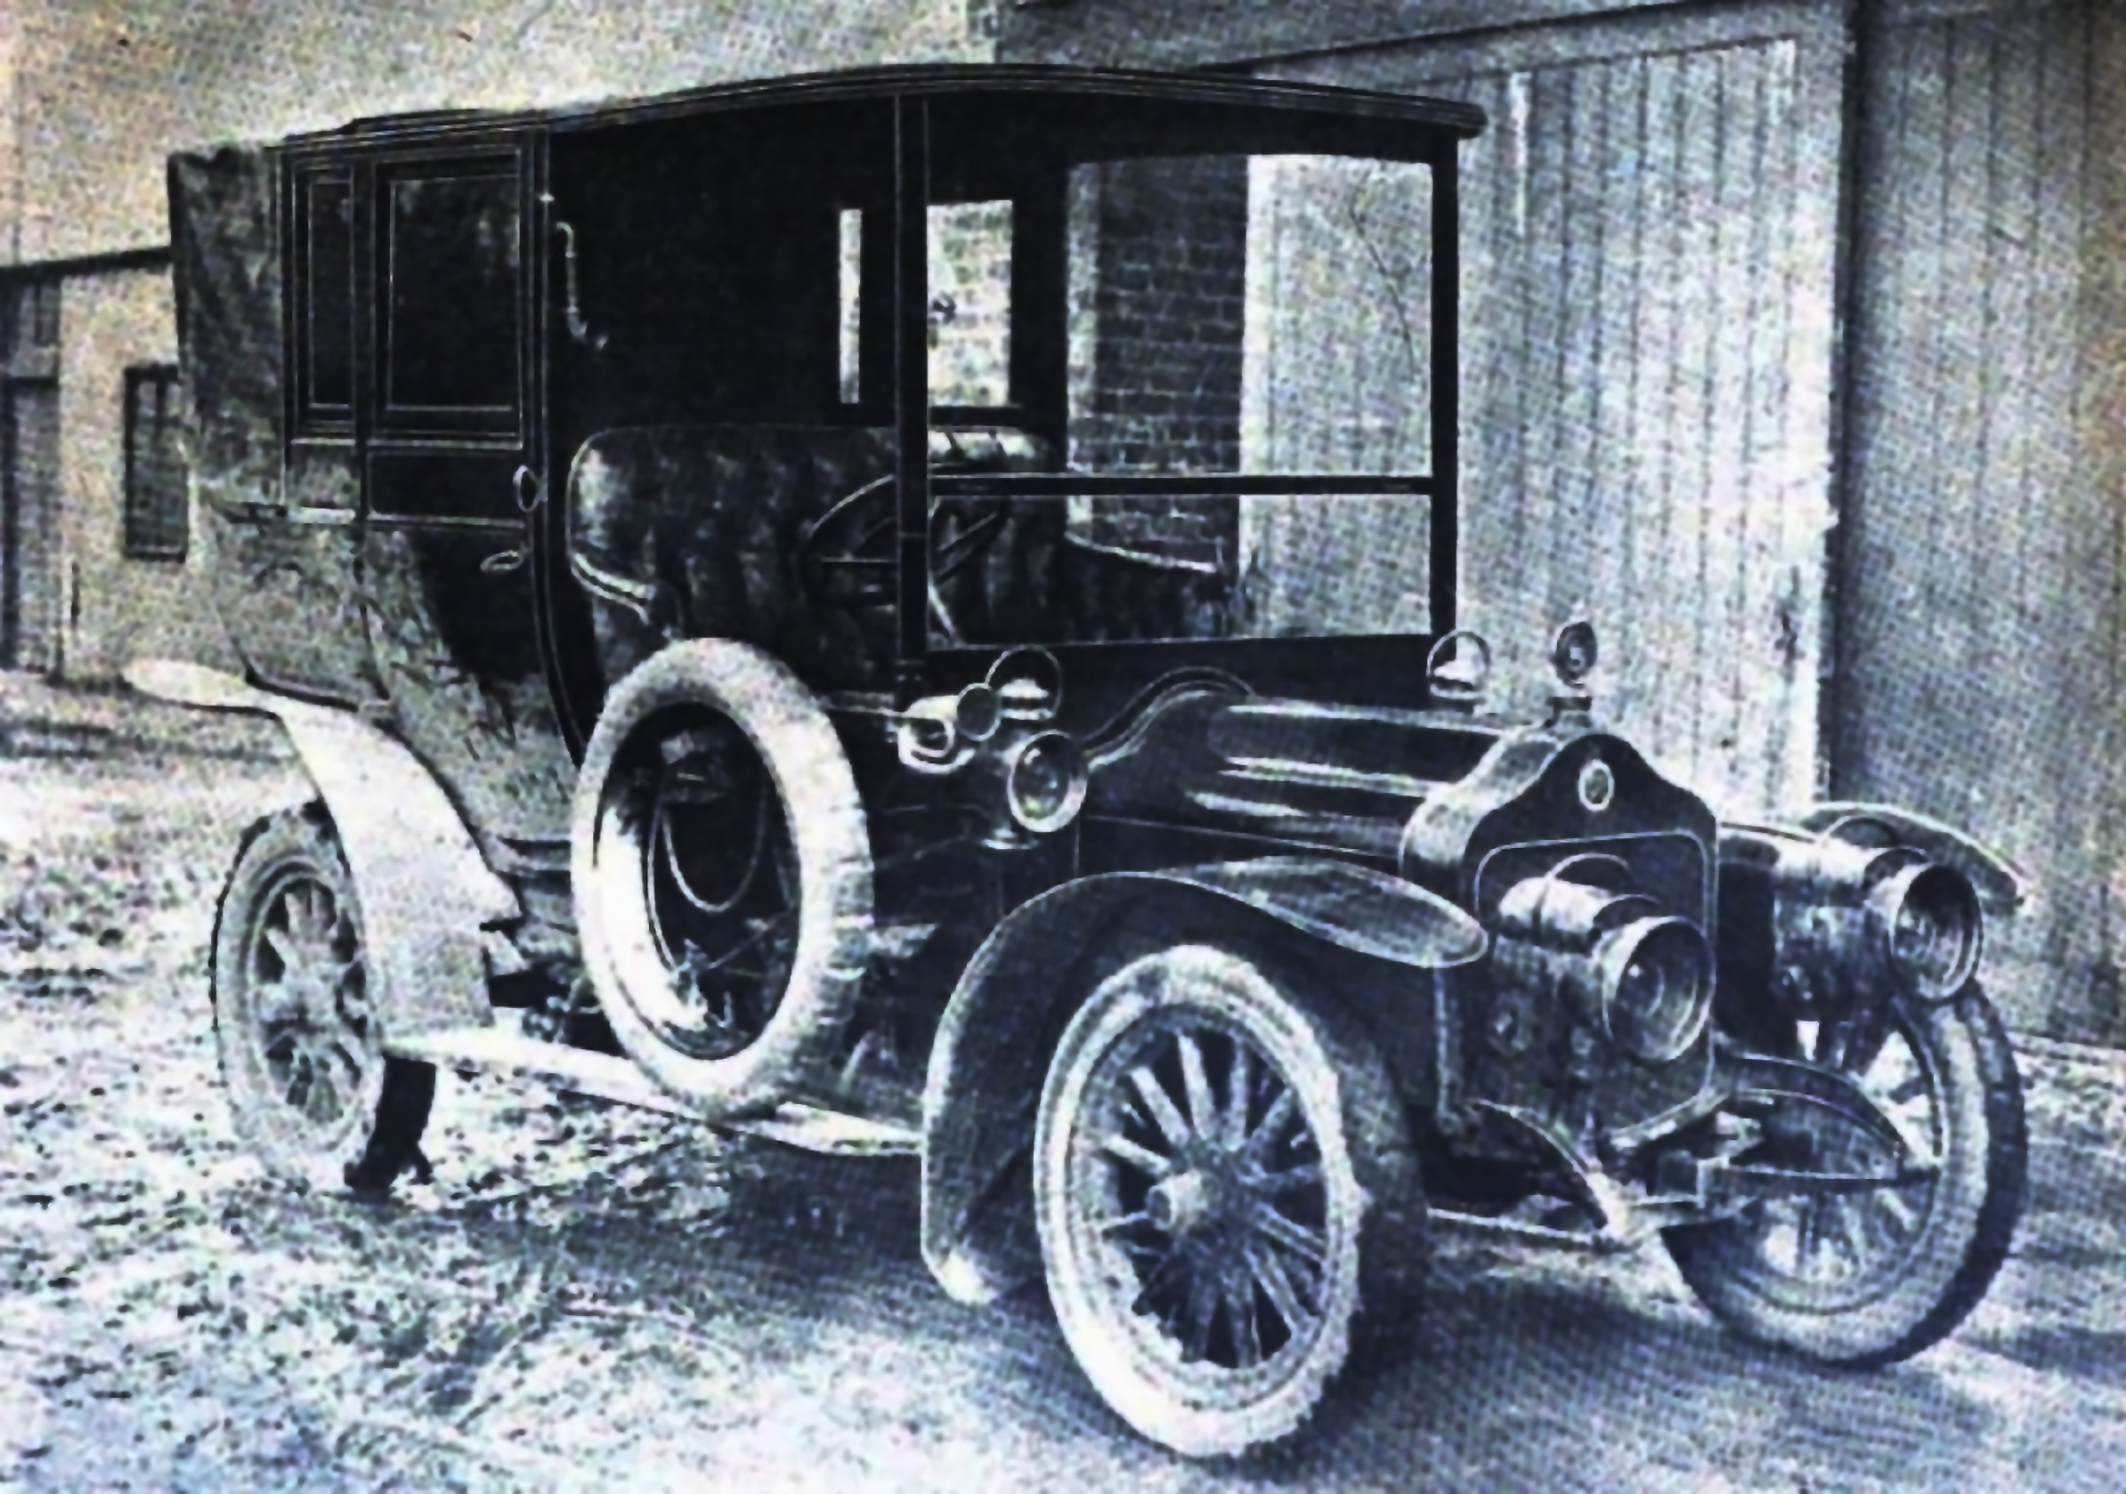 Violet Charlesworth’s car, which she had the ‘accident’ 